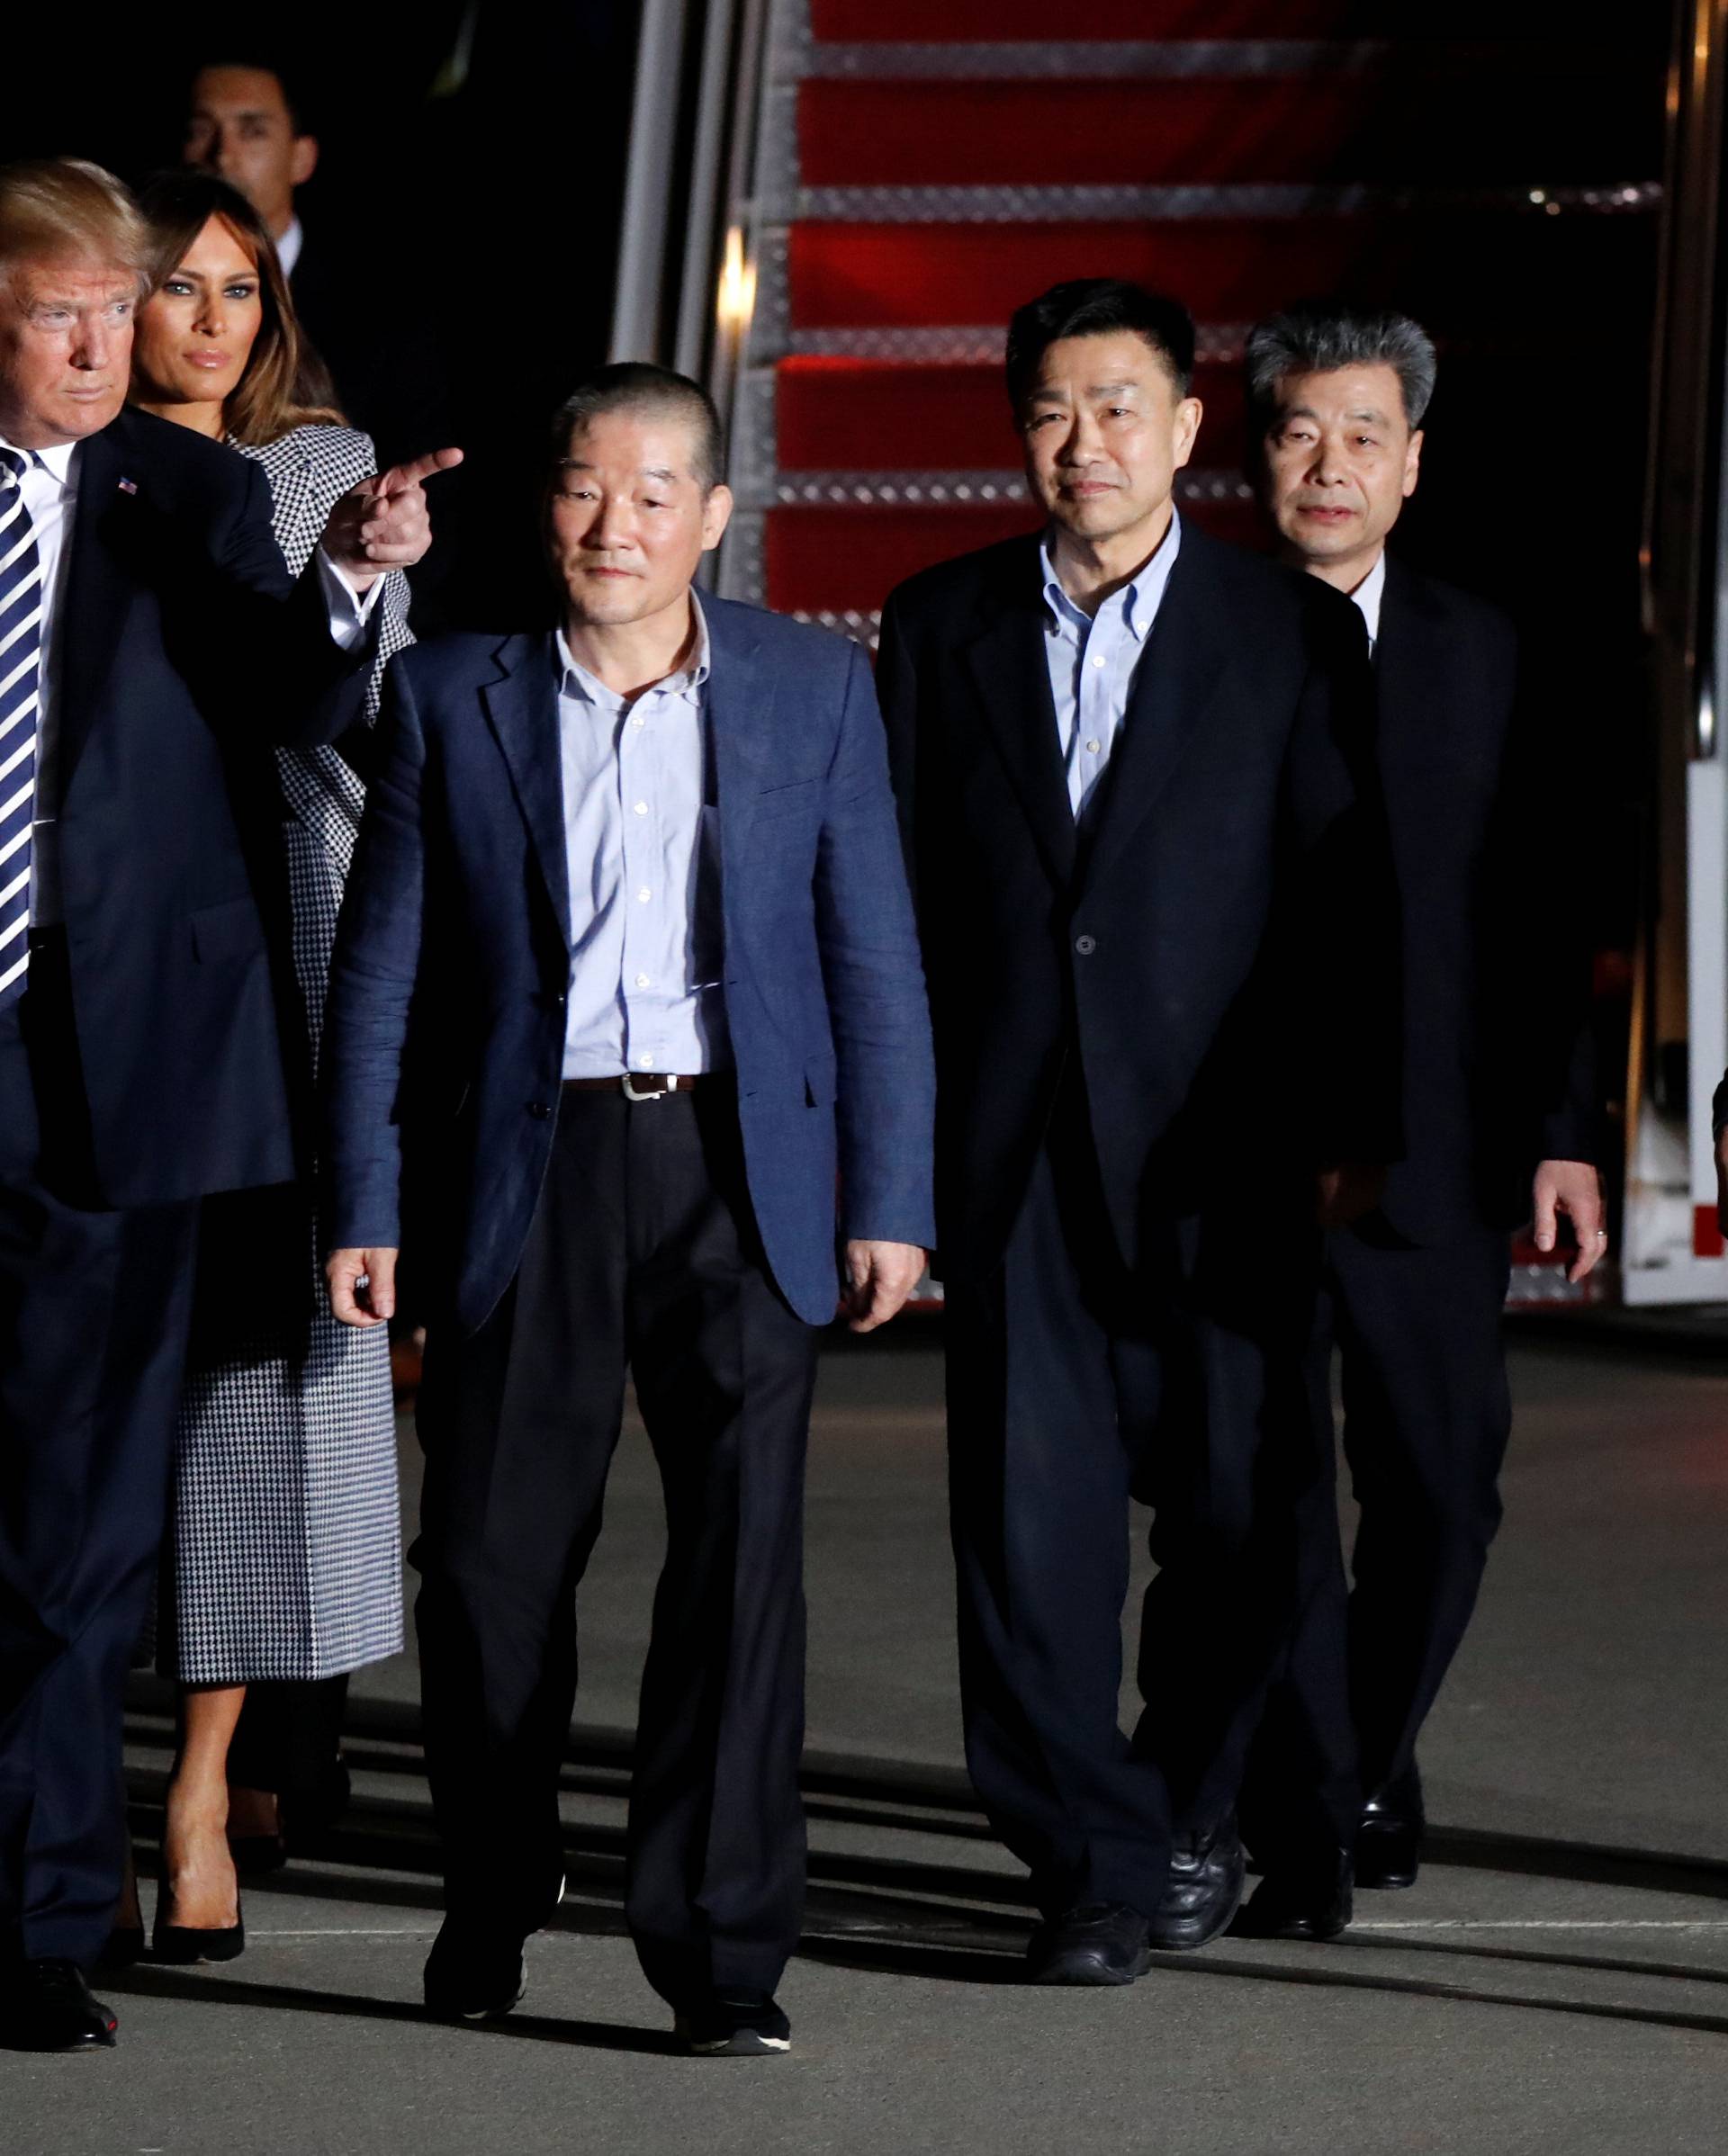 U.S.President Donald Trump gestures next to the three Americans released from detention in North Korea, Tony Kim, Kim Hak-song and Kim Dong-chul, upon their arrival at Joint Base Andrews